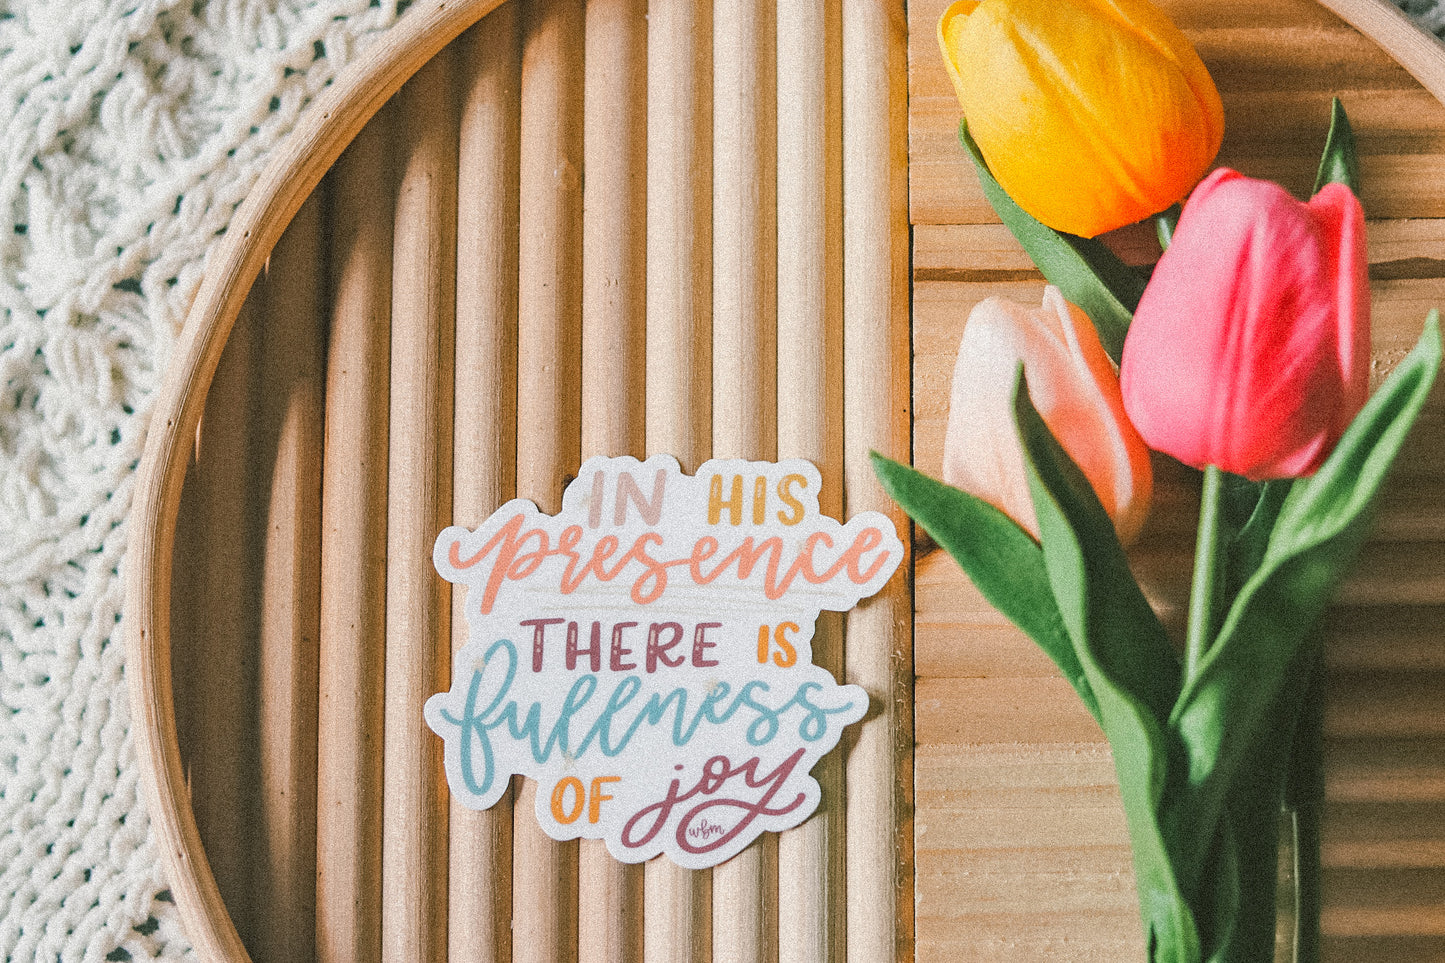 'In His presence there is fullness of joy' handlettered sticker